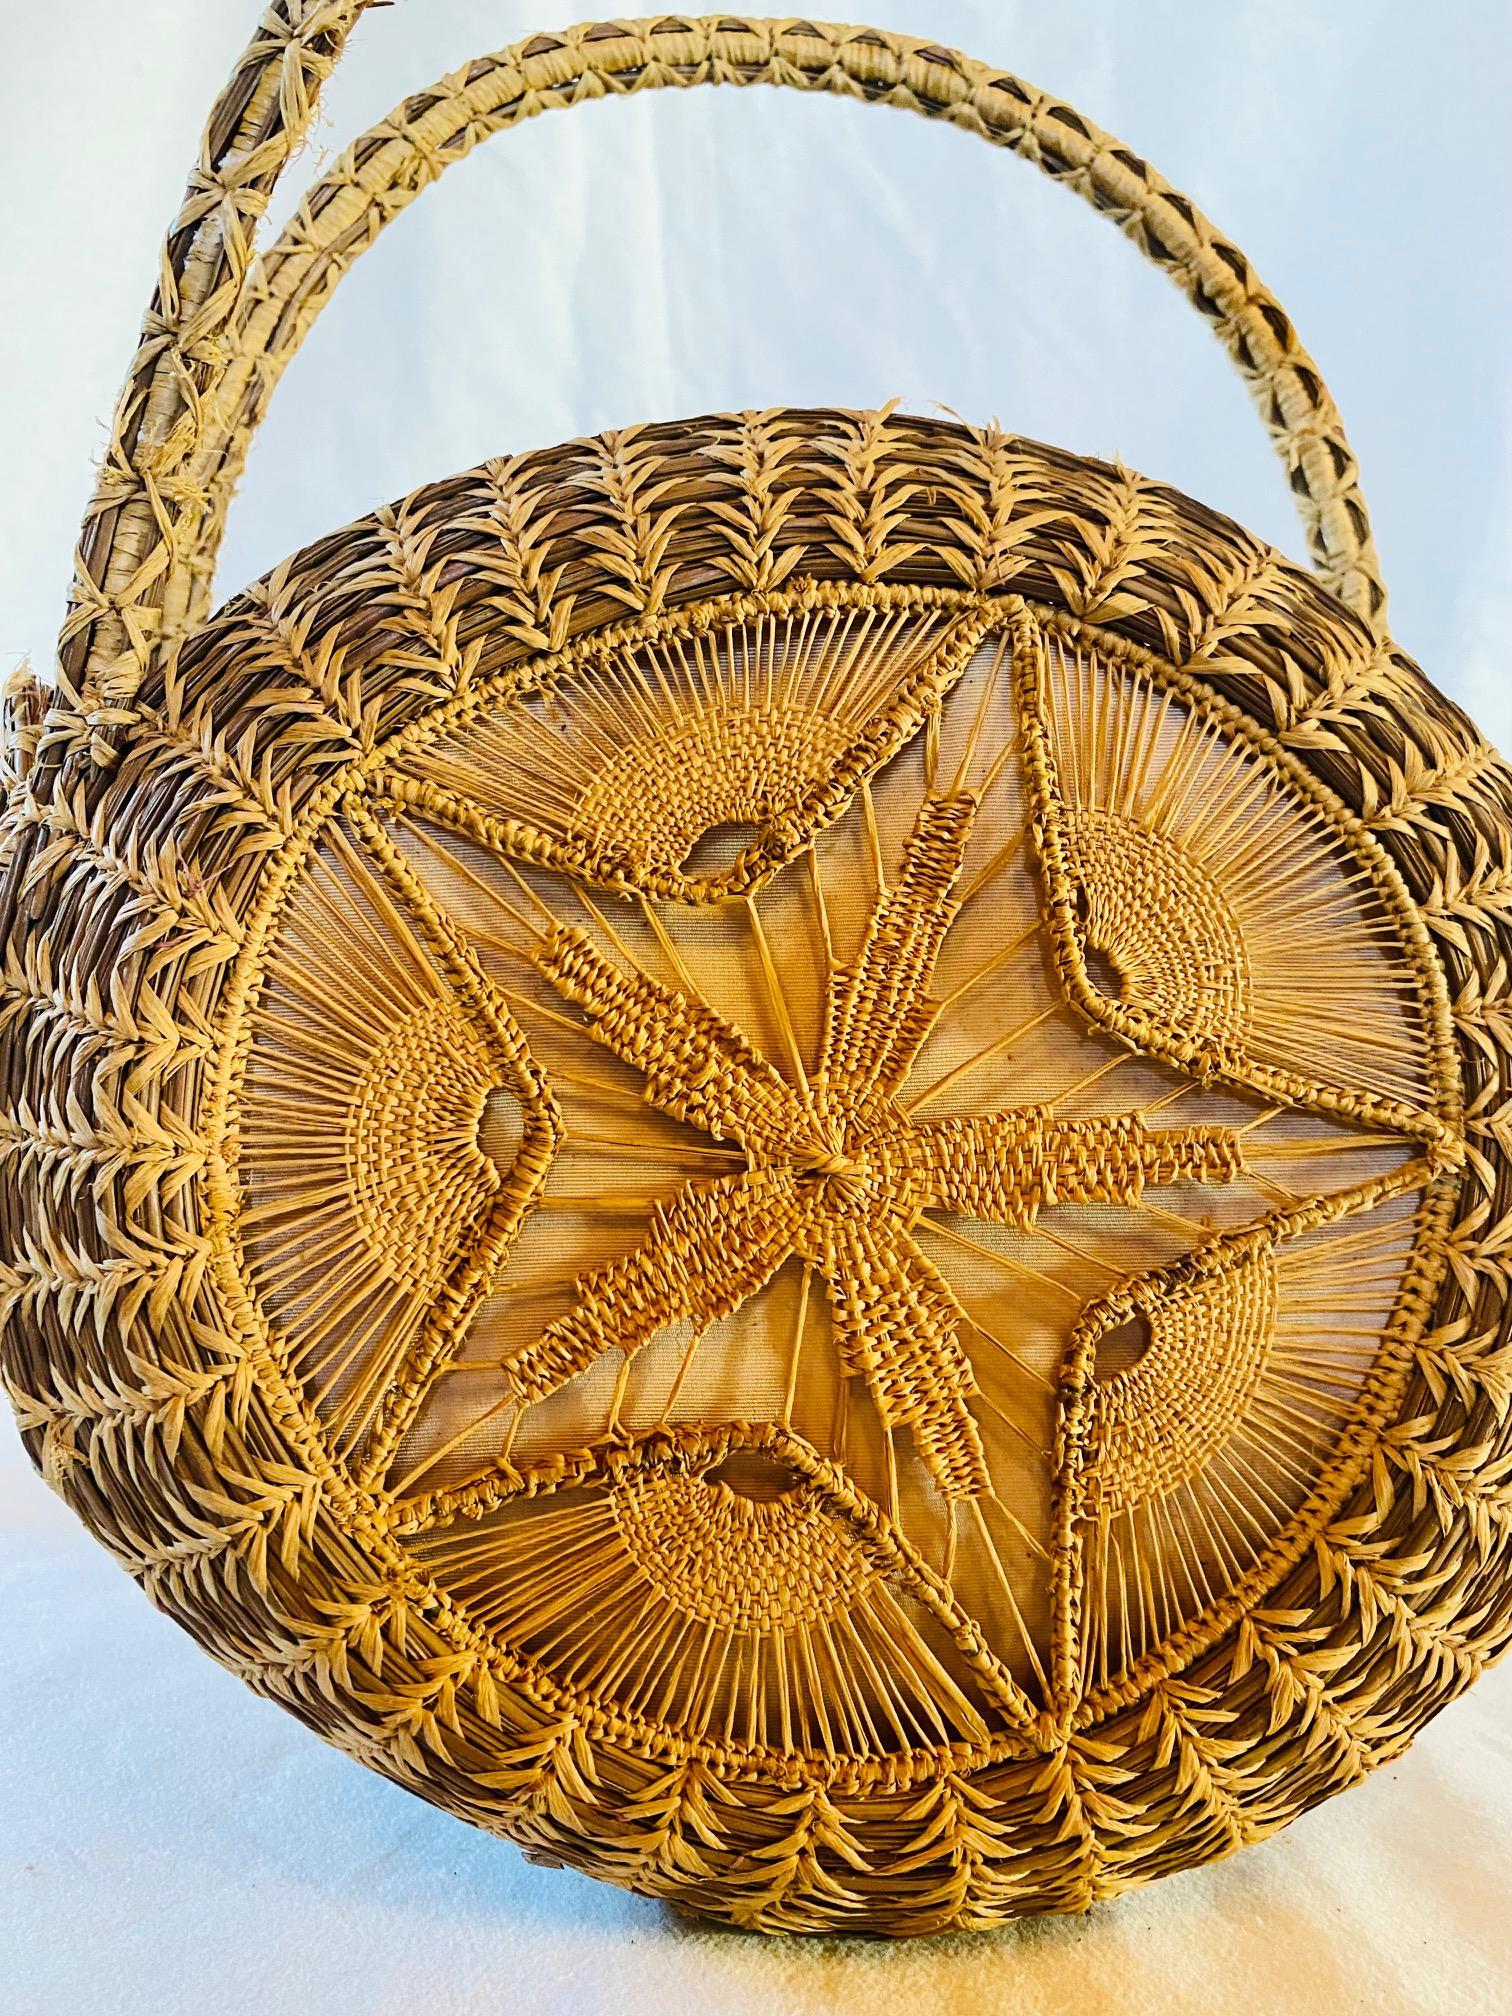 Early Vintage Mattapoisett Basket, by Gladys Ellis, Mid 20th Century, a hand-crafted basket modeled after a Nantucket purse, having a round disk shape with open top, made of hand-stitched longleaf pine needles and raffia in braided and lace-like